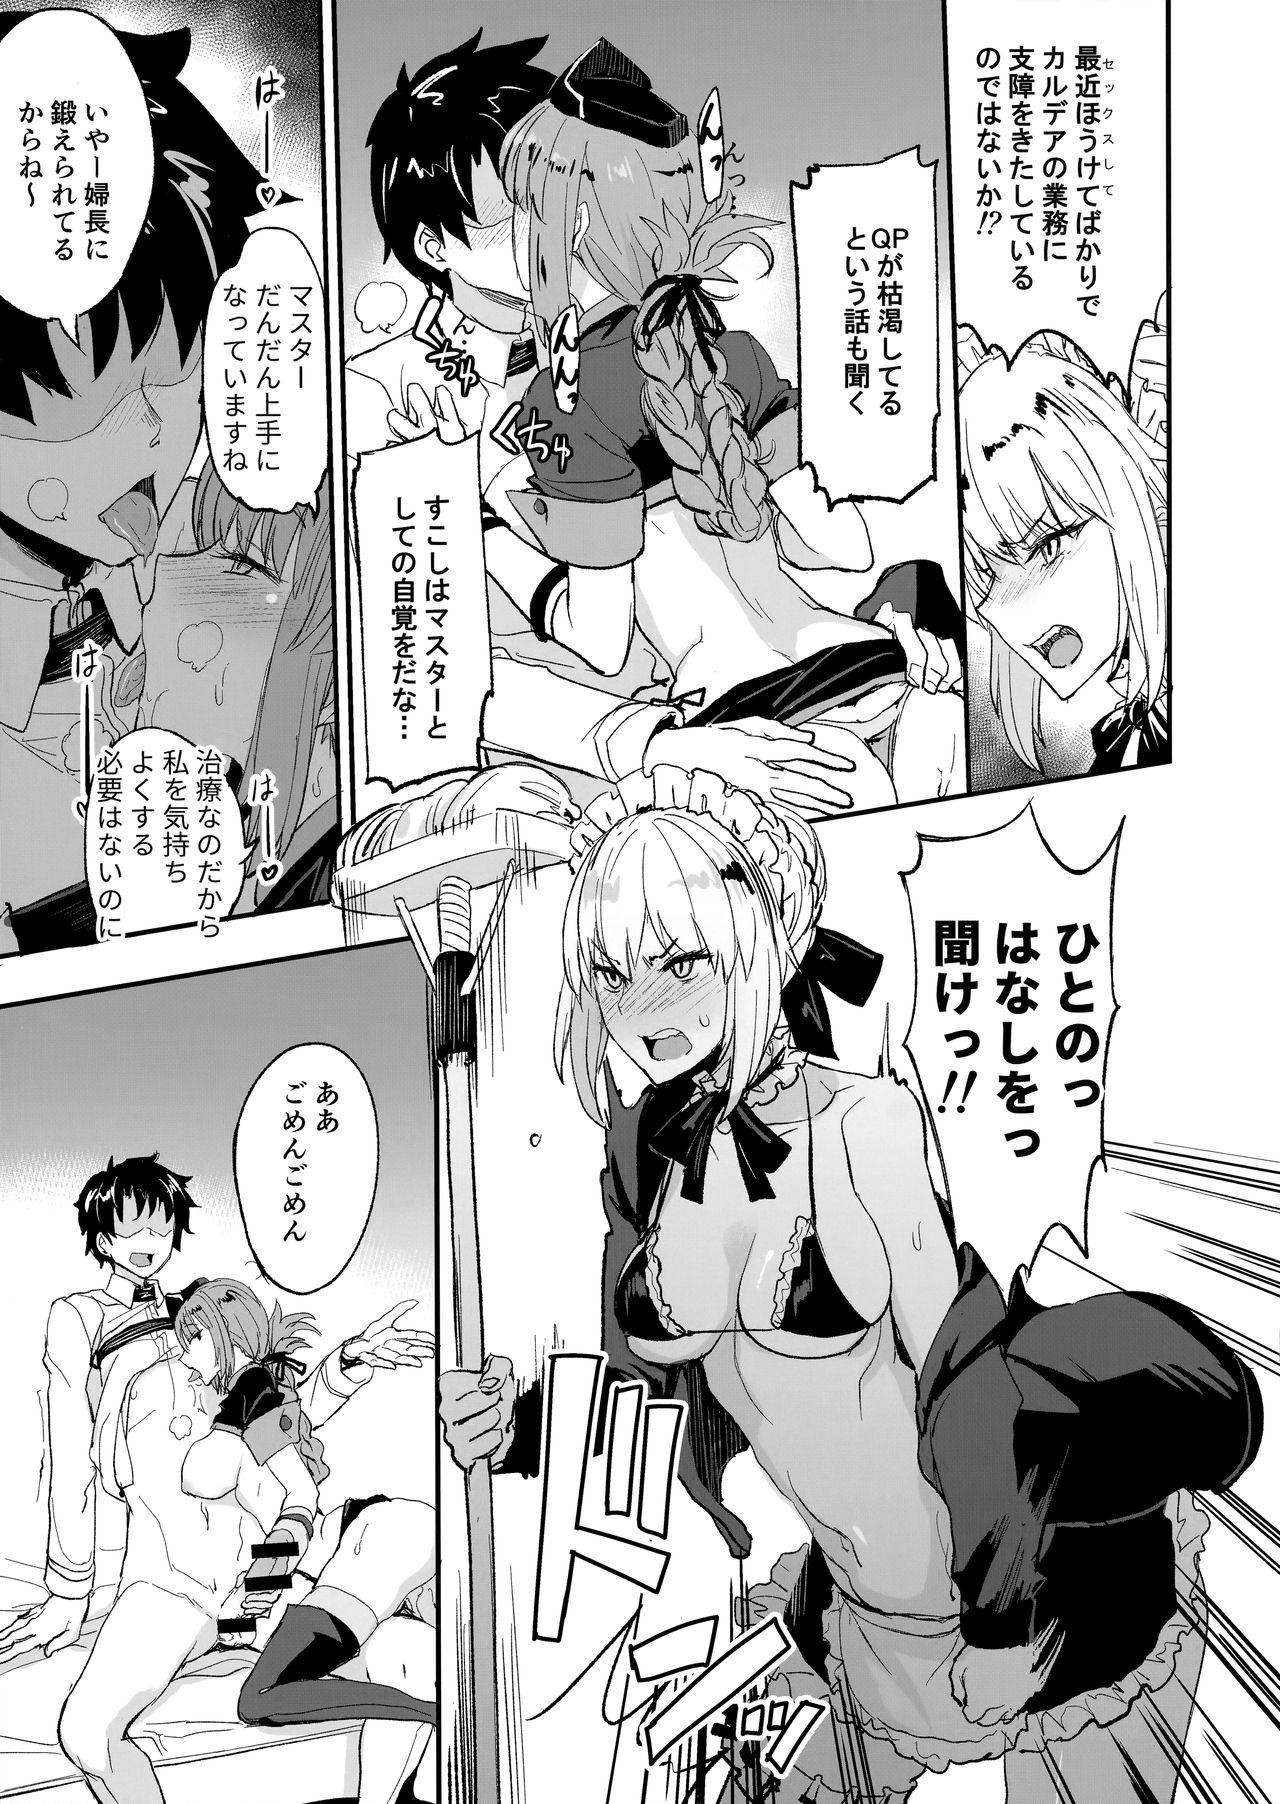 Hot Girls Getting Fucked FGO no Erohon 2 - Fate grand order Bang - Page 10